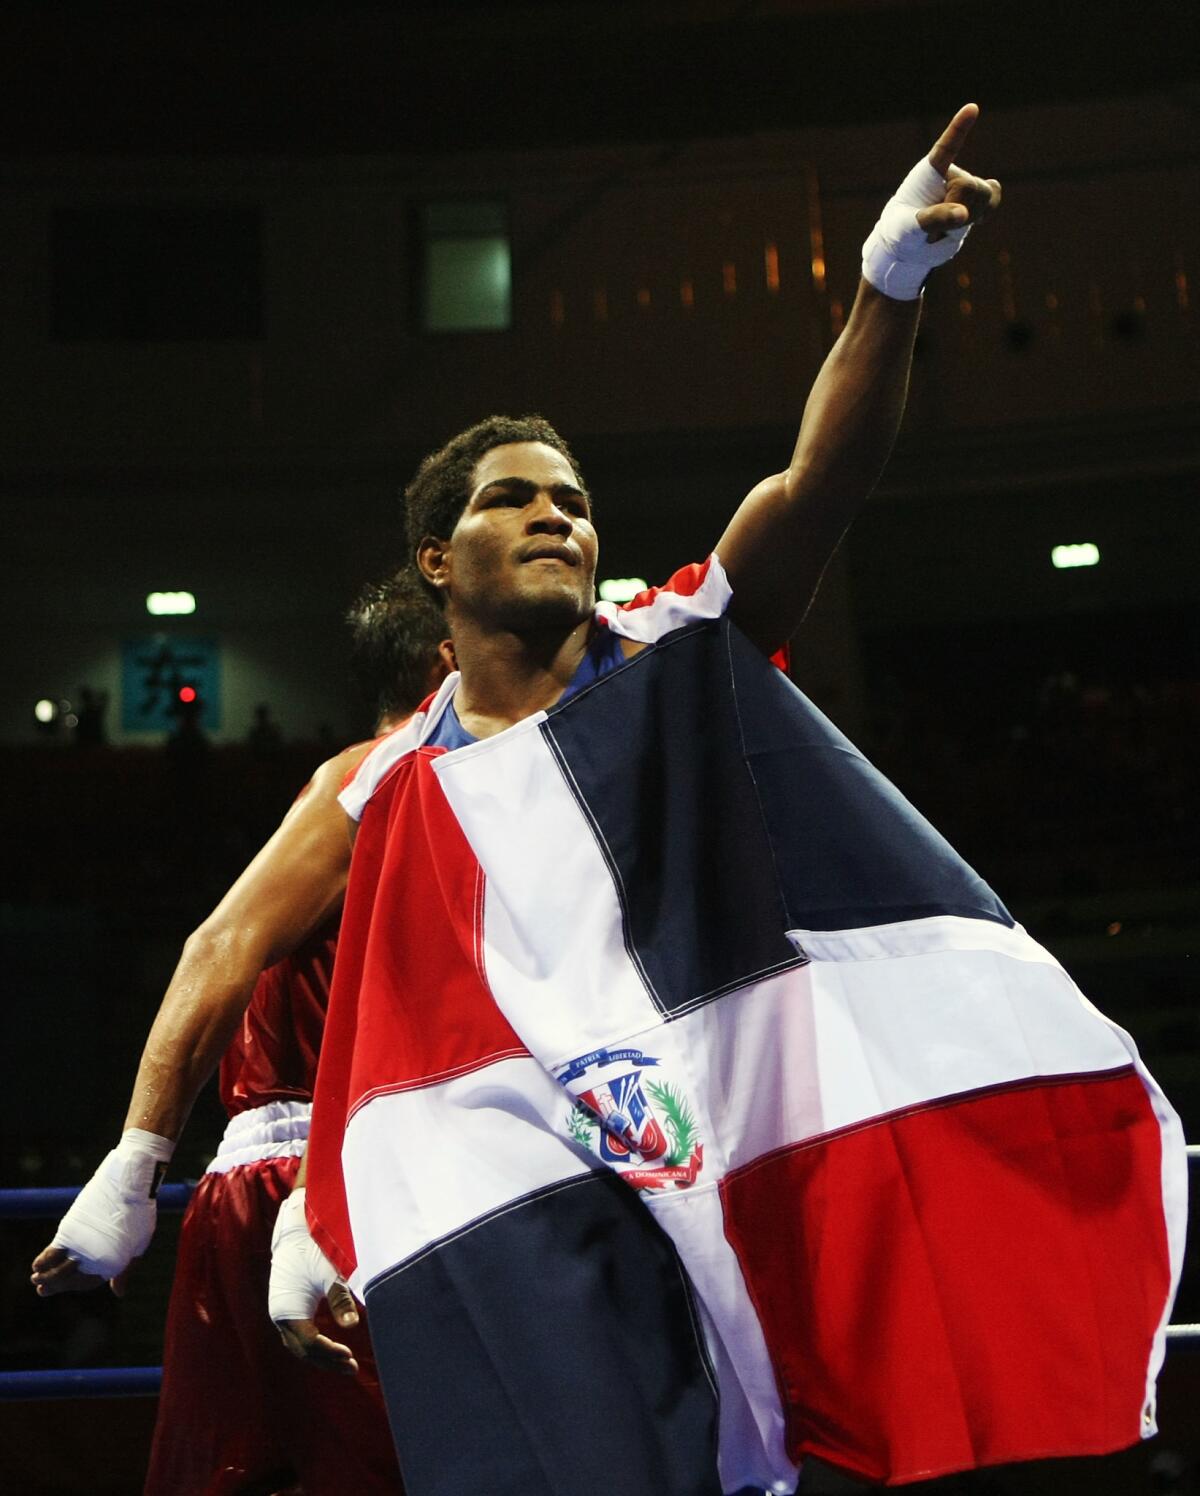 BEIJING - AUGUST 23: Felix Diaz of Dominican Republic celebrates victory against Manus Boonjumnong of Thailand in the Men's Light Welter (64kg) Final Bout held at Workers' Indoor Arena on Day 15 of the Beijing 2008 Olympic Games on August 23, 2008 in Beijing, China. (Photo by Nick Laham/Getty Images)